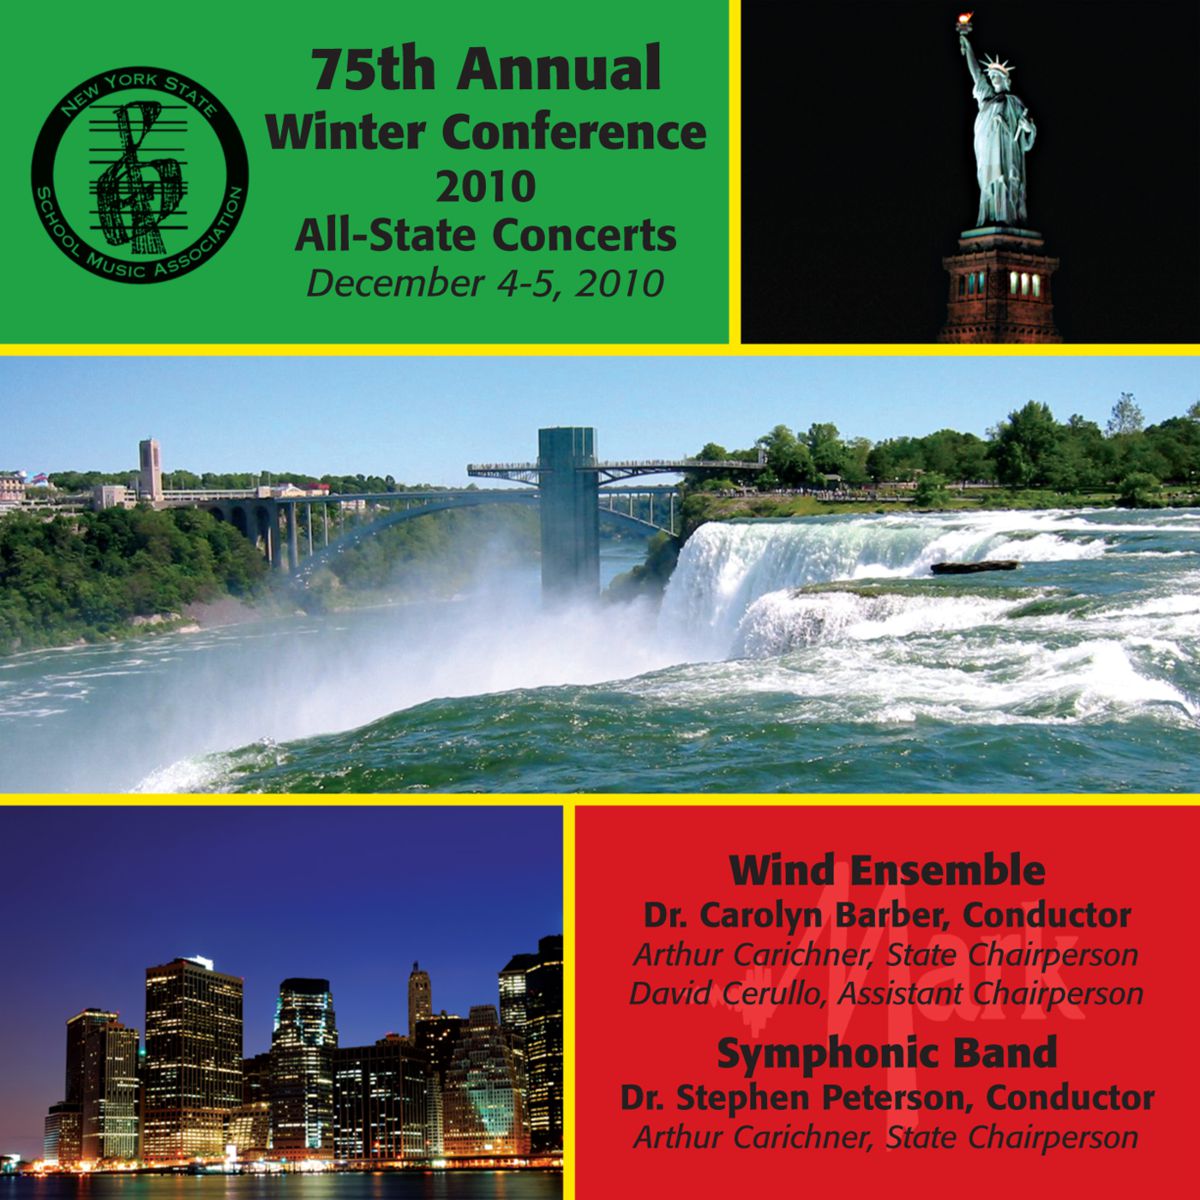 2010 New York State School Music Association: All-State Wind Ensemble and All-State Symphonic Band - cliquer ici